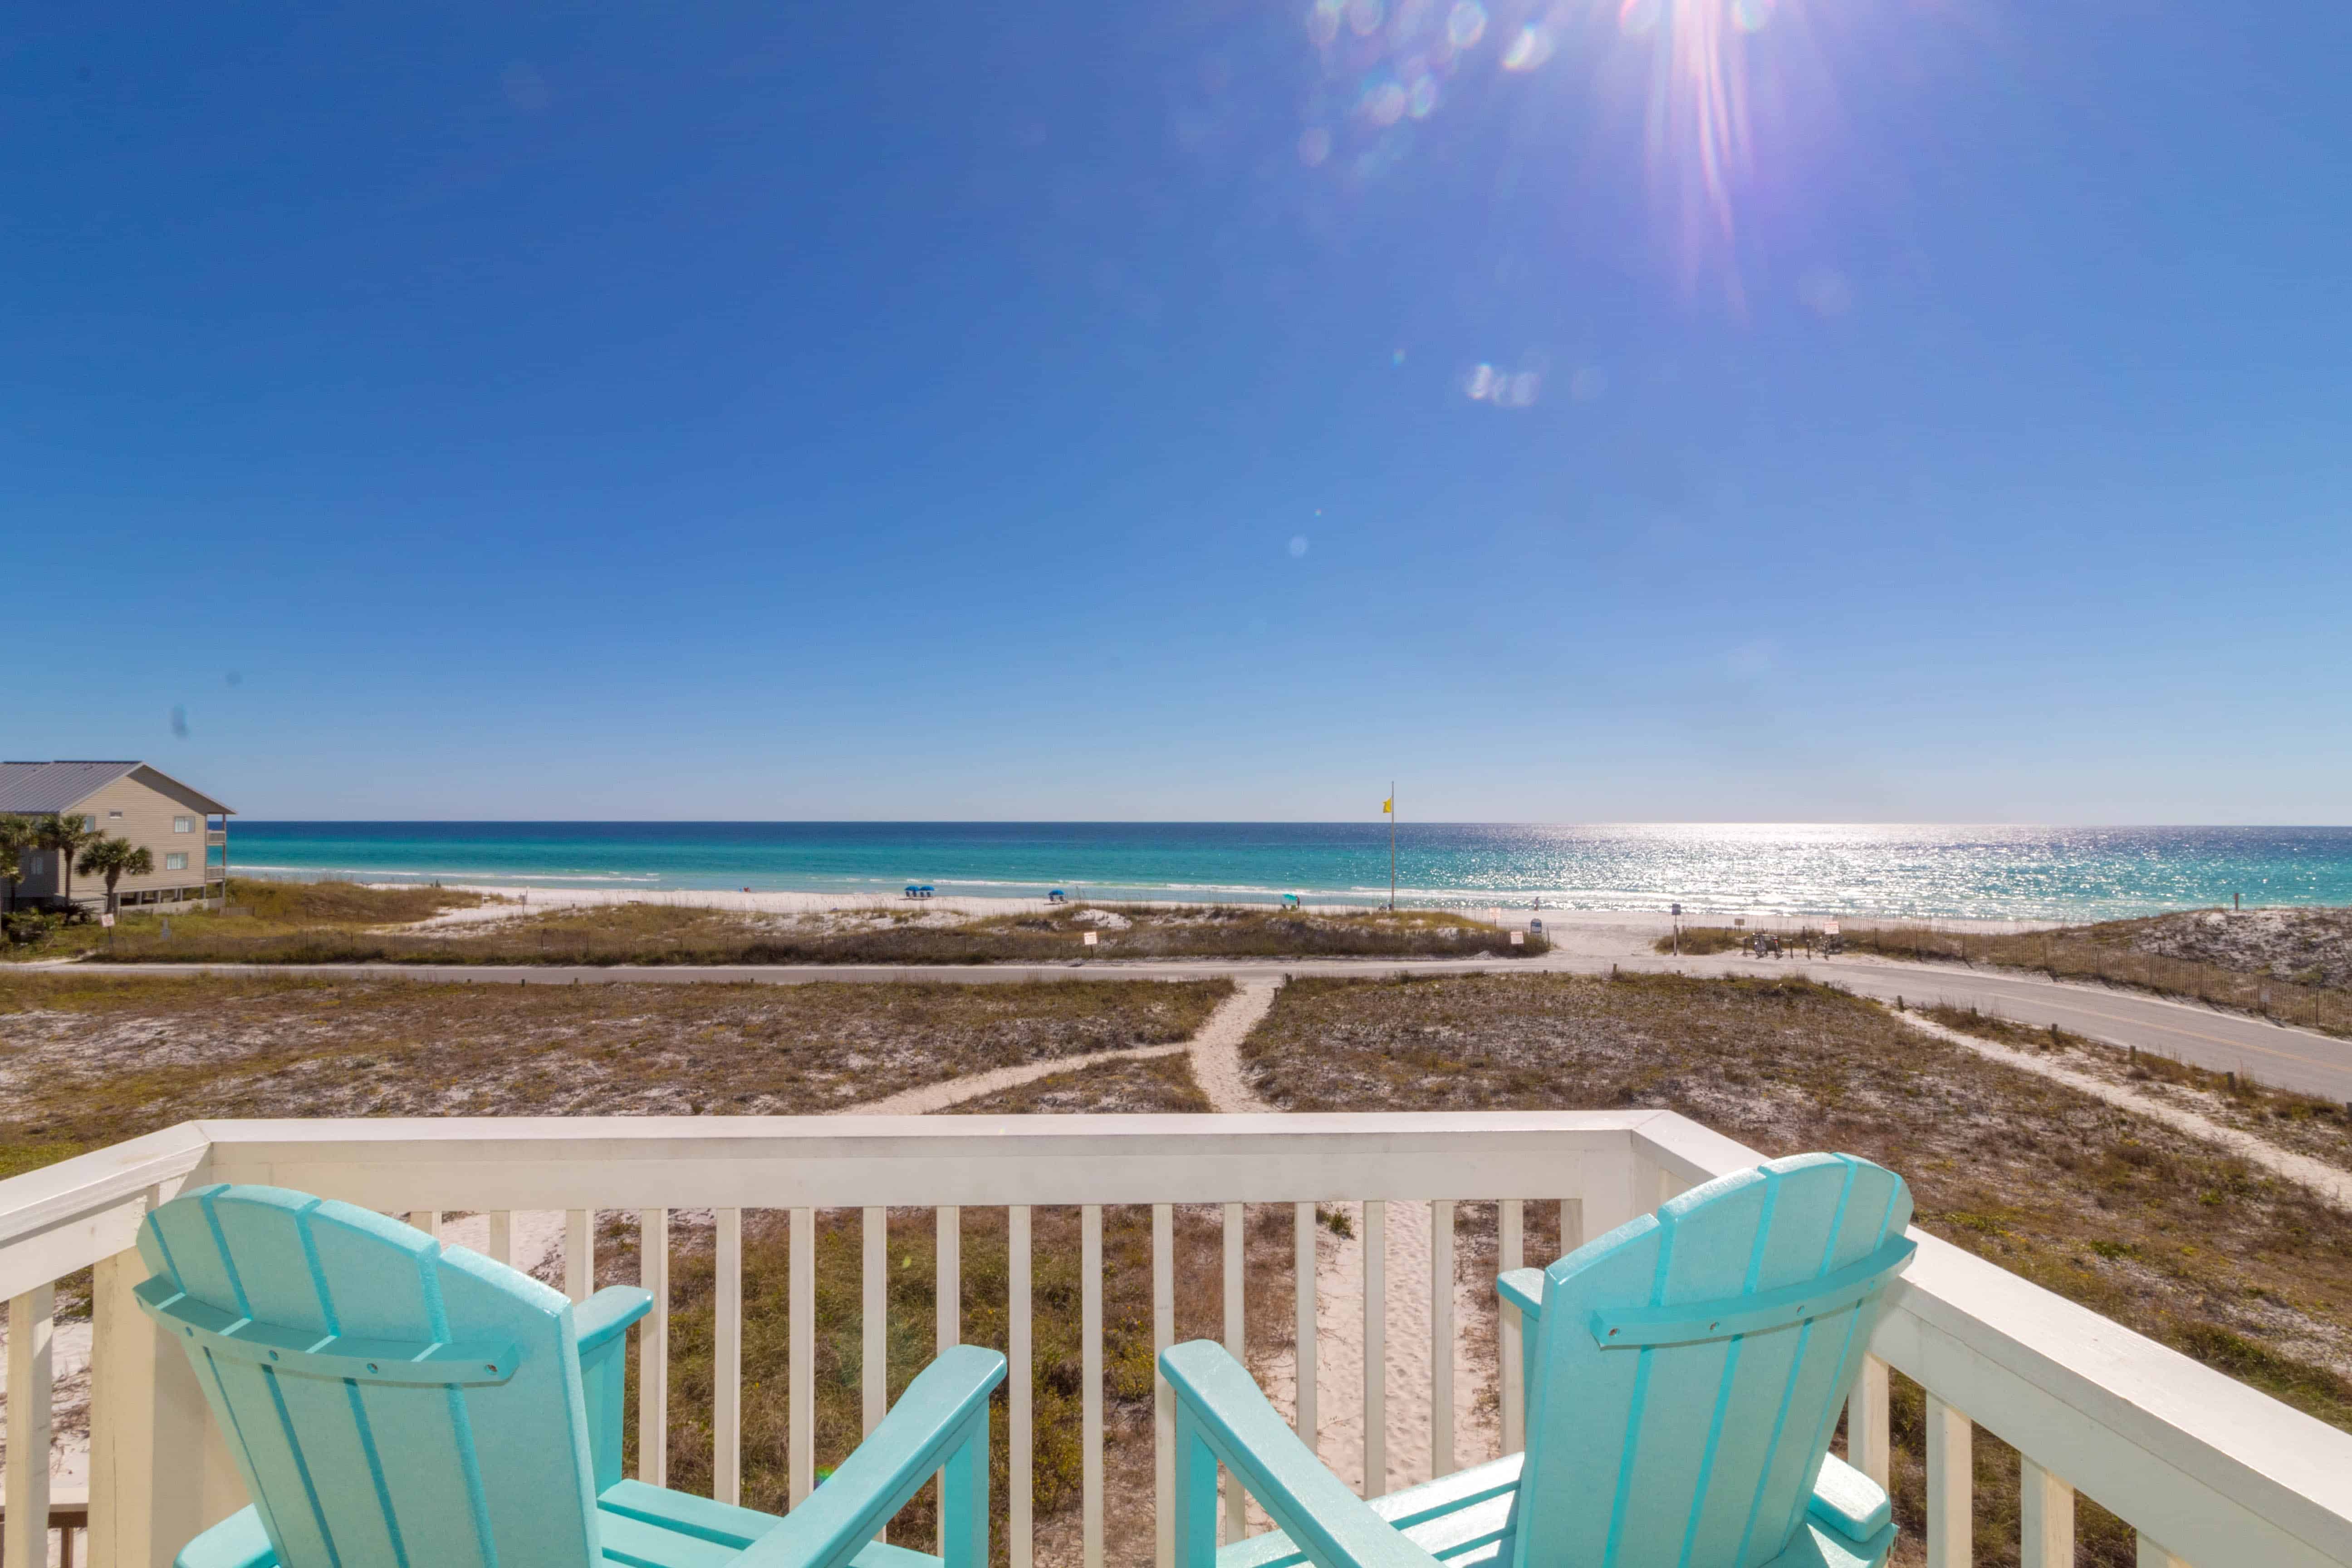 Why Choose Paradise Properties Vacation Rentals & Sales to Manage Your 30a Vacation Rental